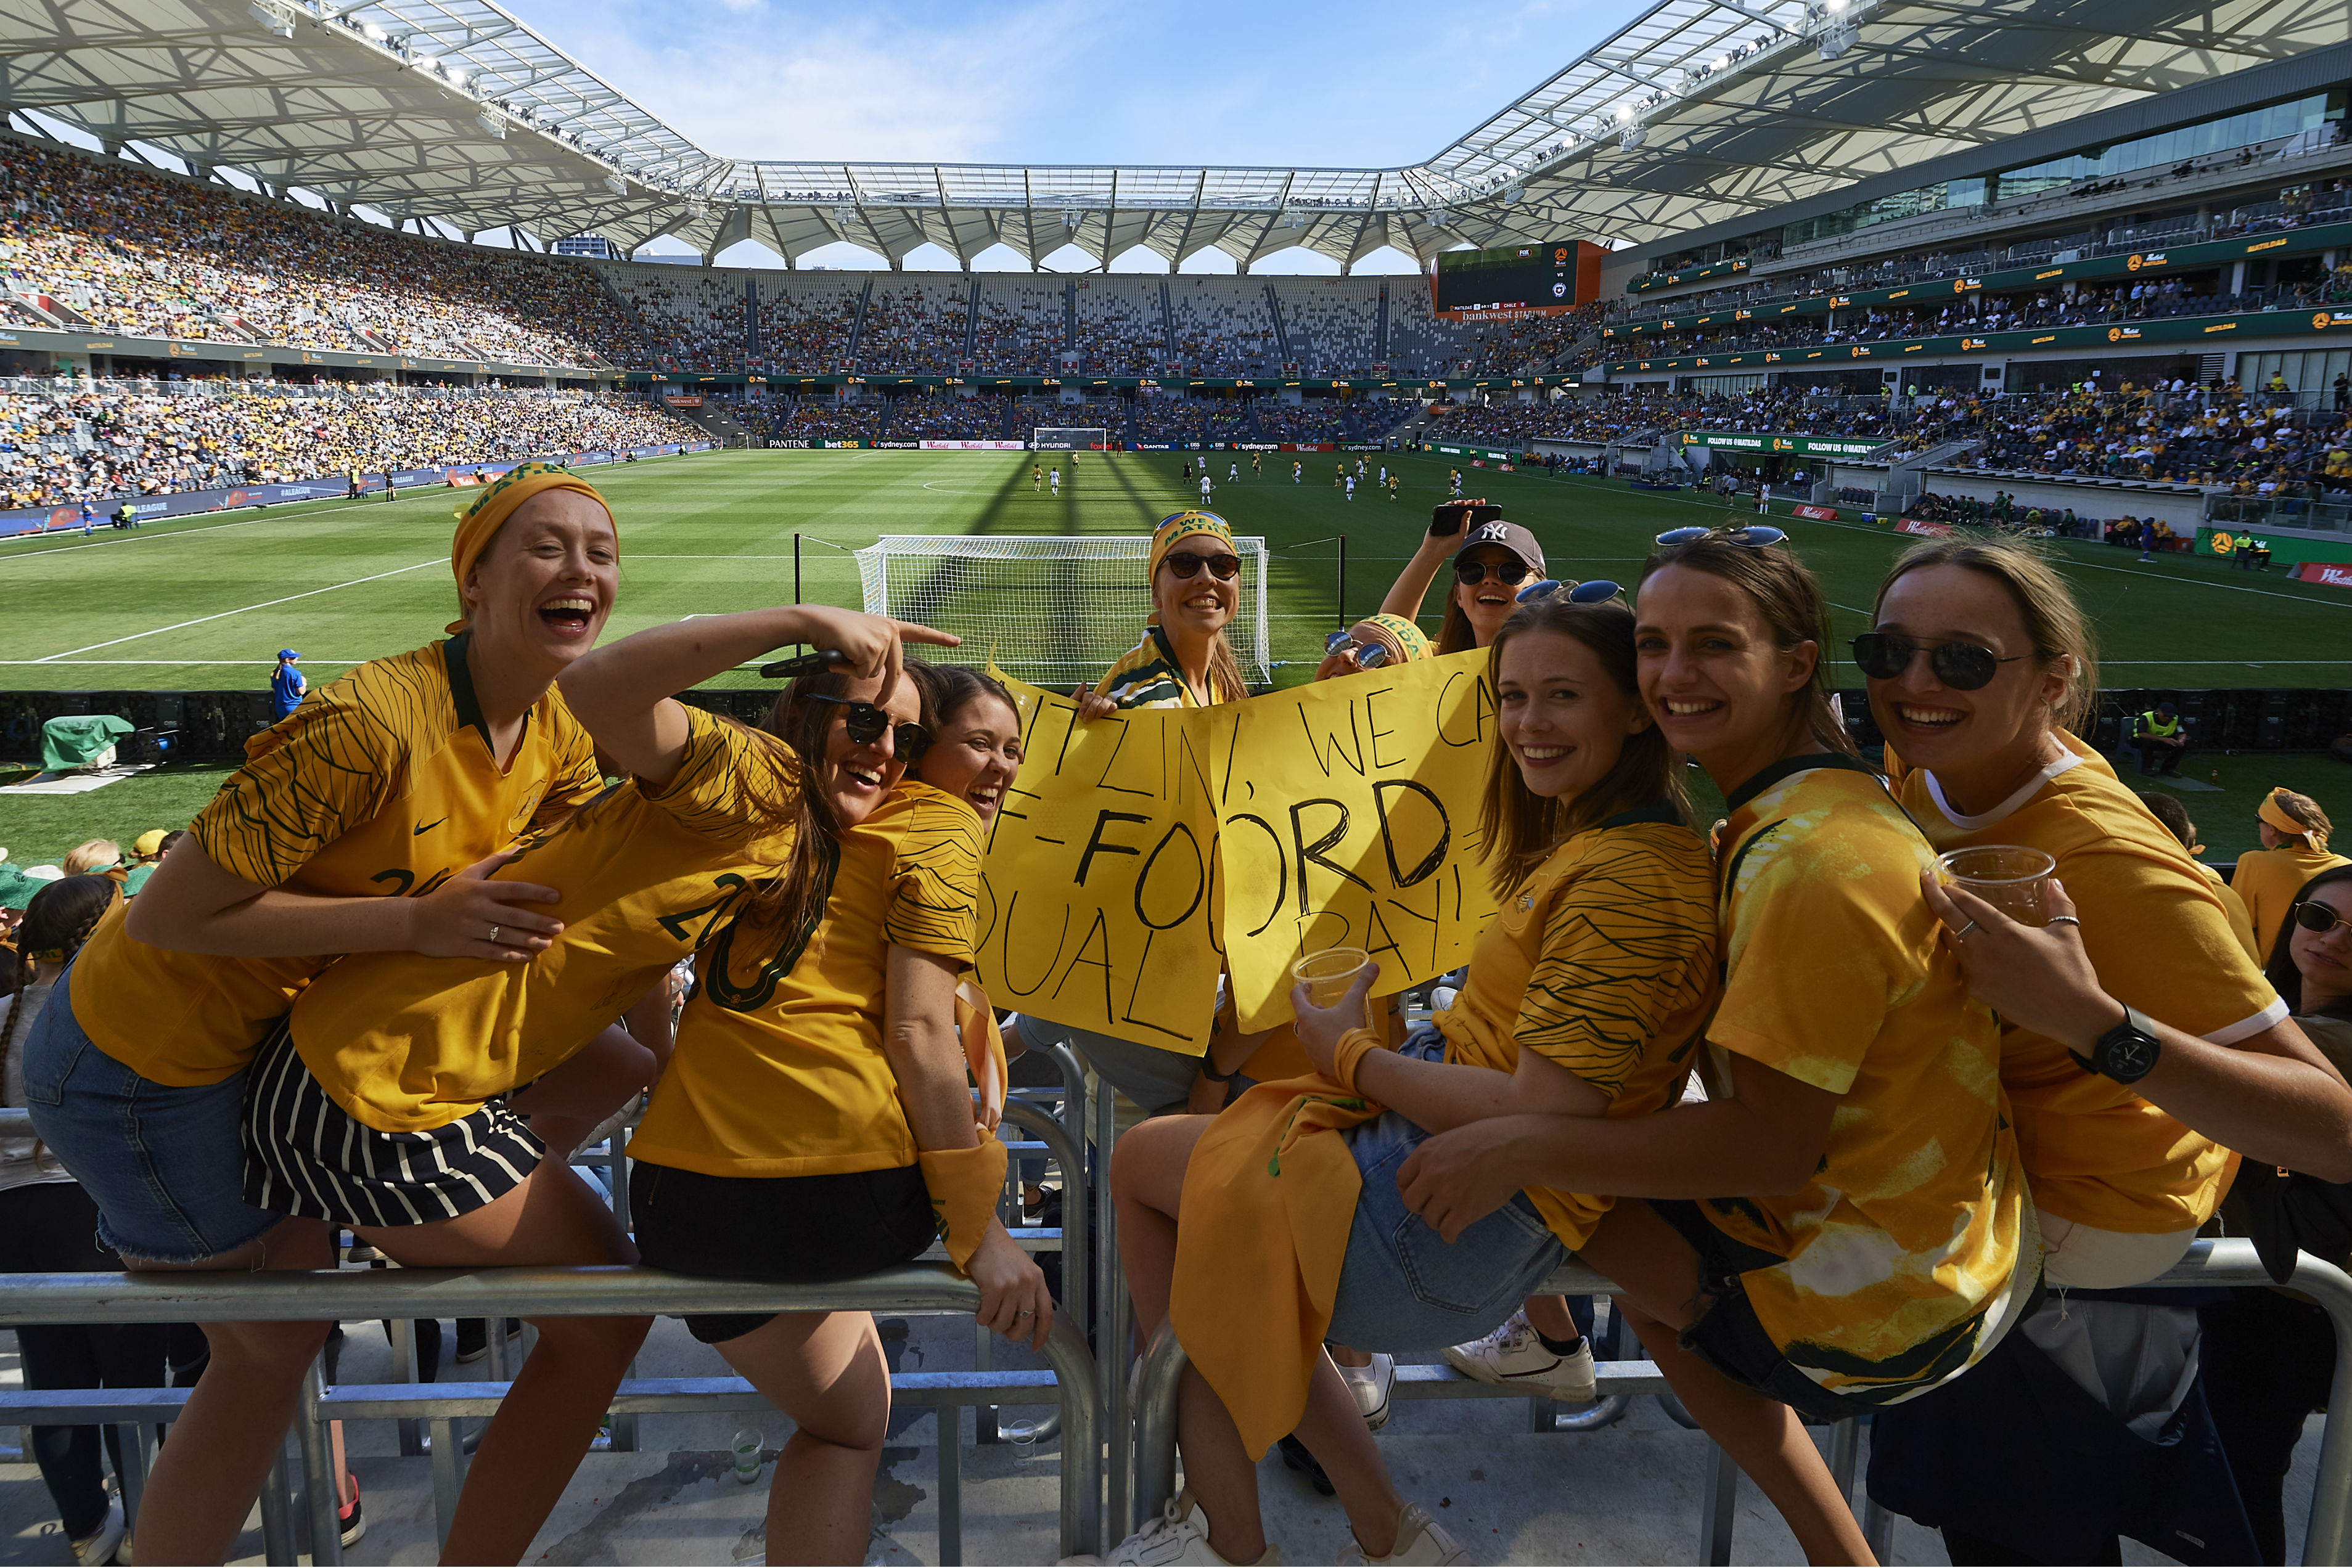 A record crowd of more than 20,000 see Westfield Matildas beat Chile at Bankwest Stadium in Sydney